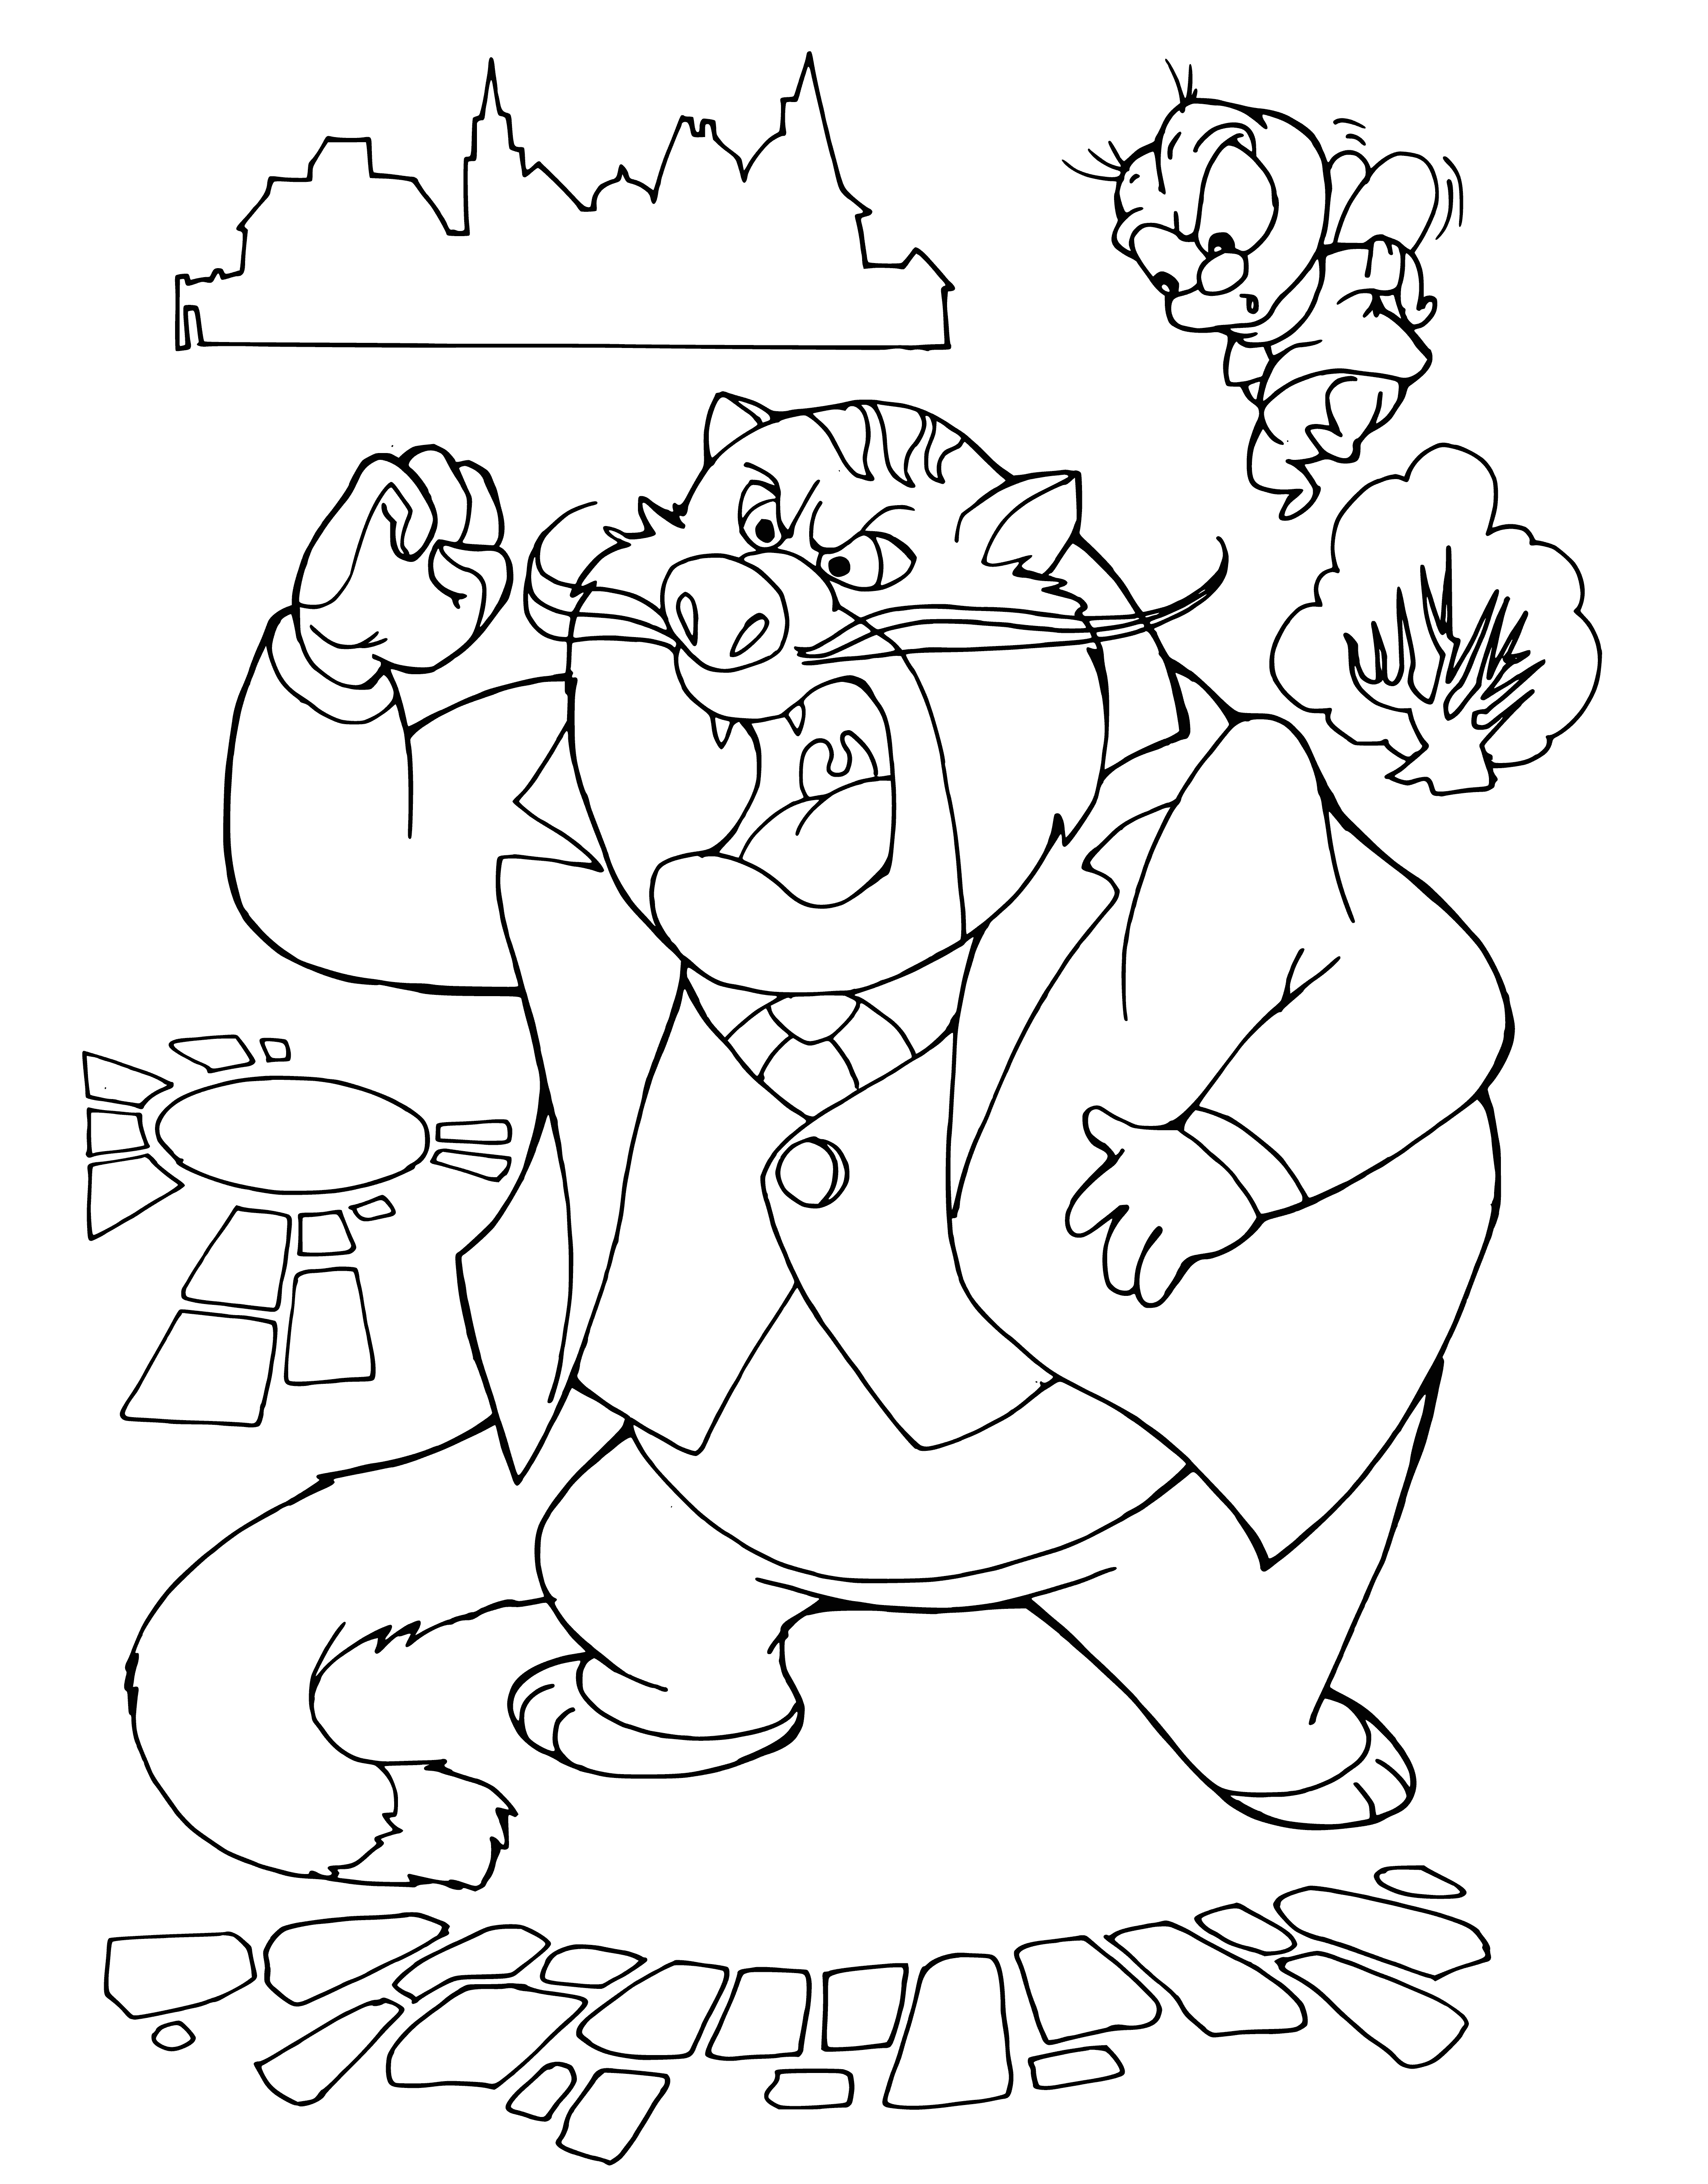 Fat Cat and Zipper coloring page